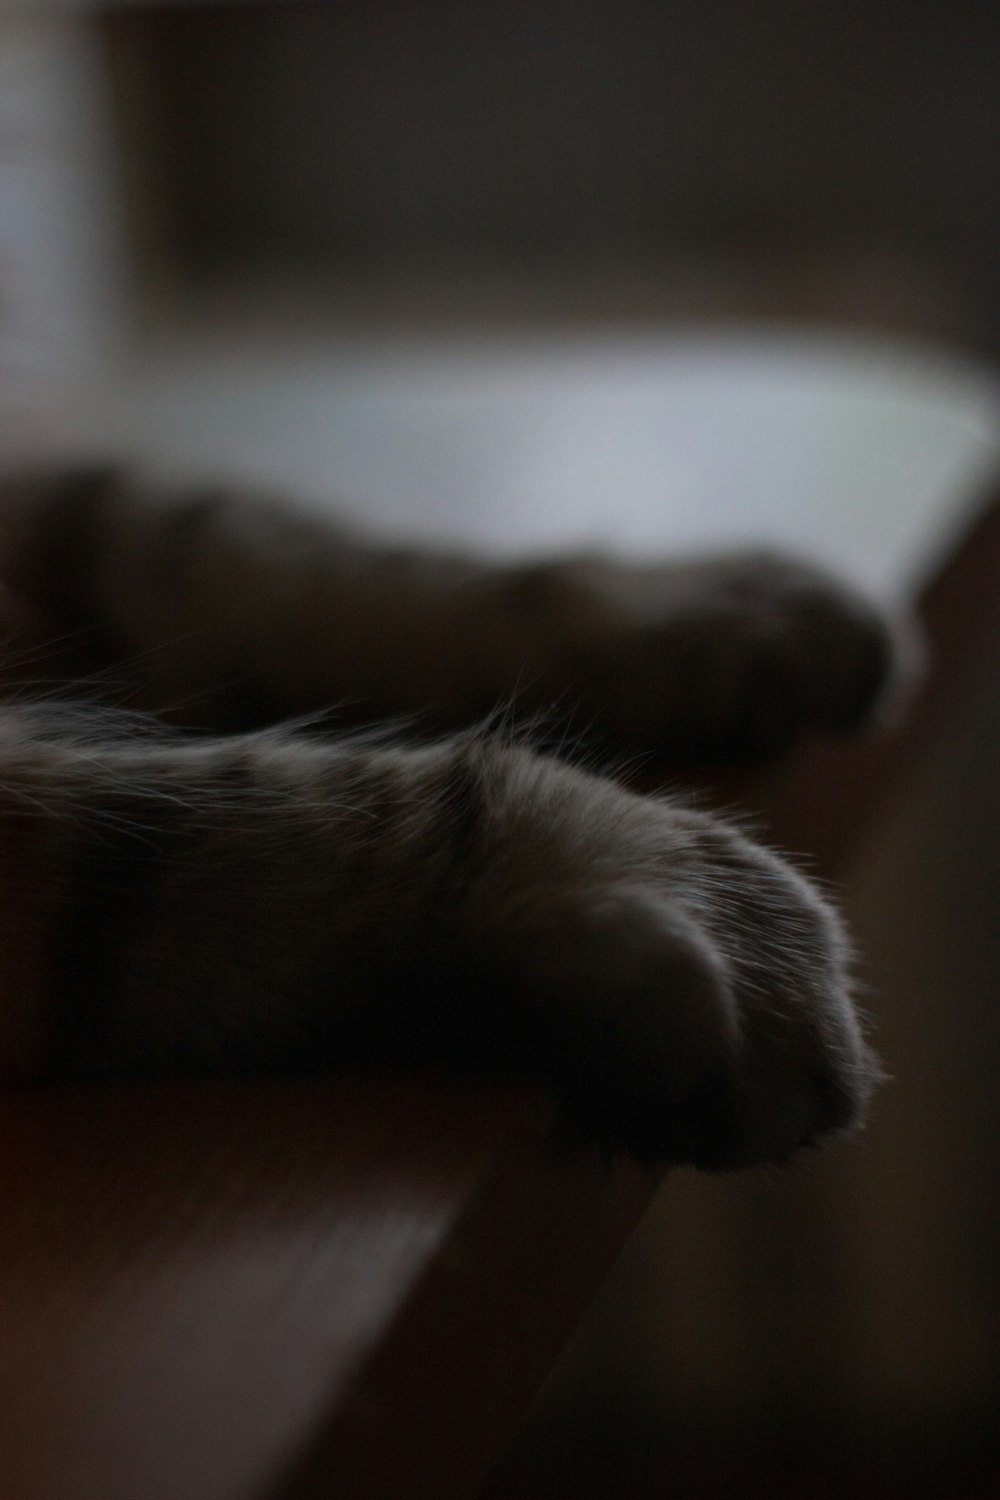 a close up of a cat's paw on a table